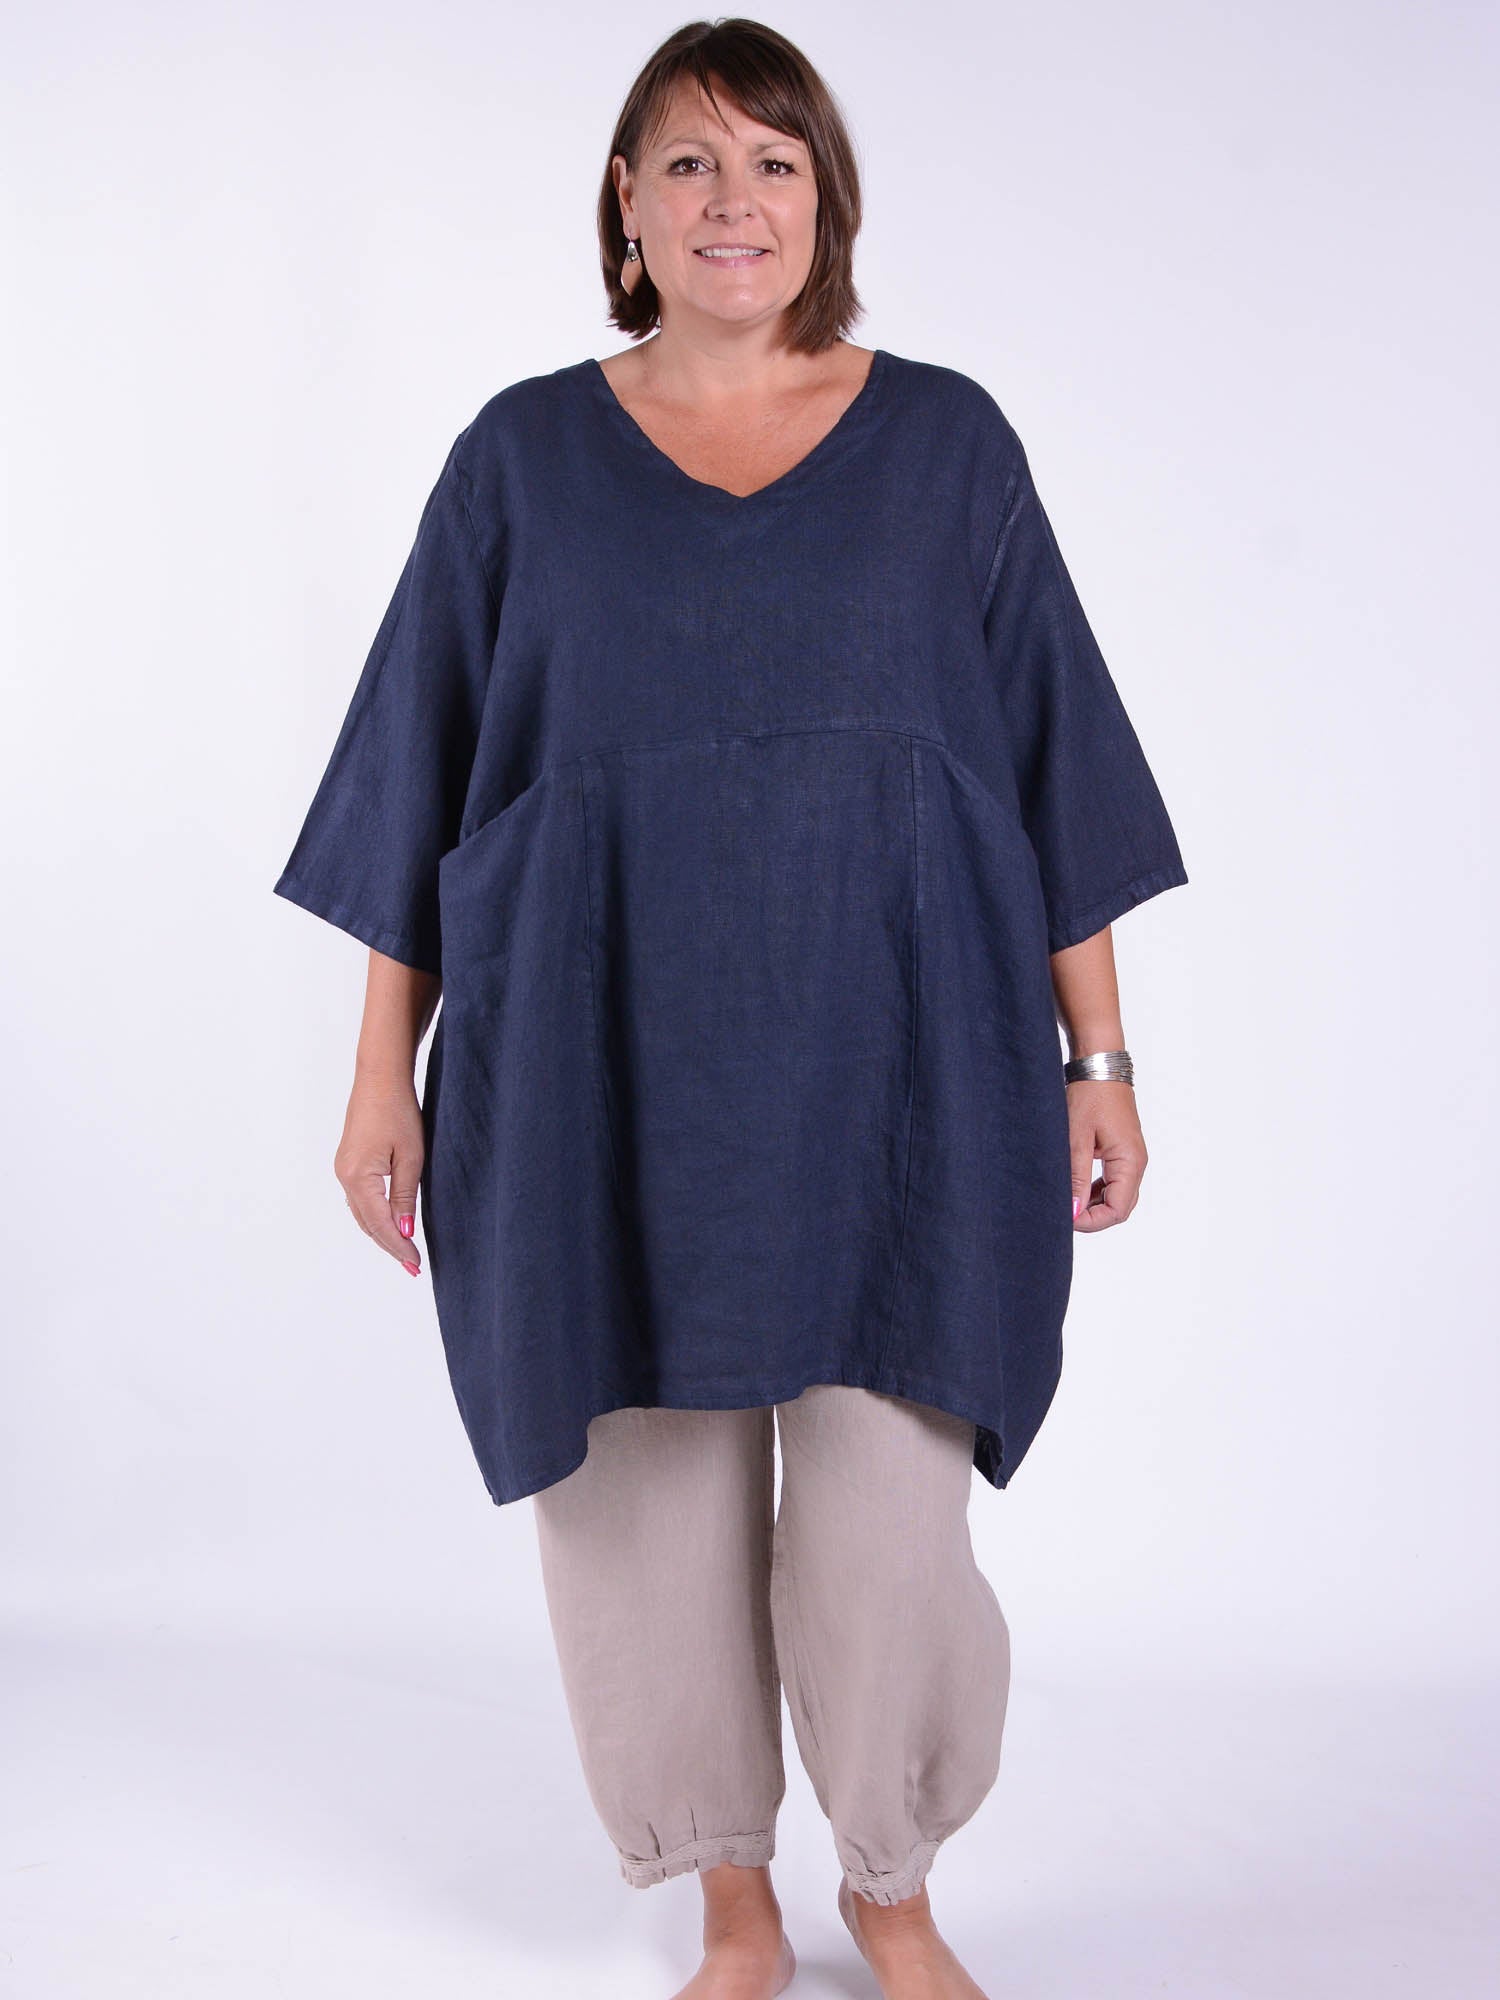 Heavy Linen Quirky Tunic V Neck - 9479V, Tops & Shirts, Pure Plus Clothing, Lagenlook Clothing, Plus Size Fashion, Over 50 Fashion